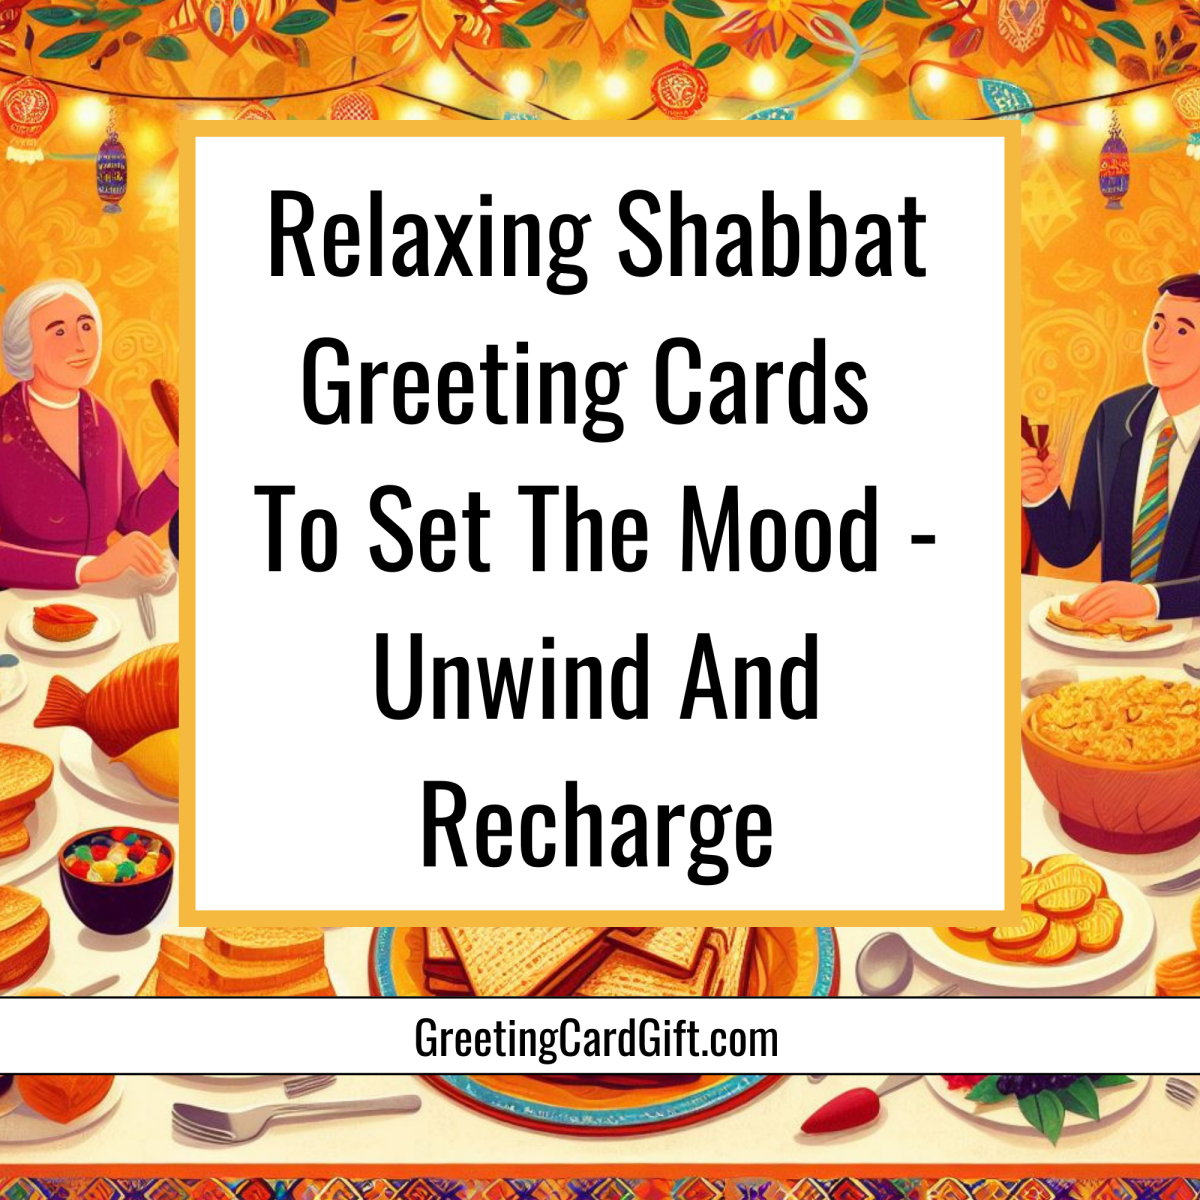 Relaxing Shabbat Greeting Cards To Set The Mood – Unwind And Recharge